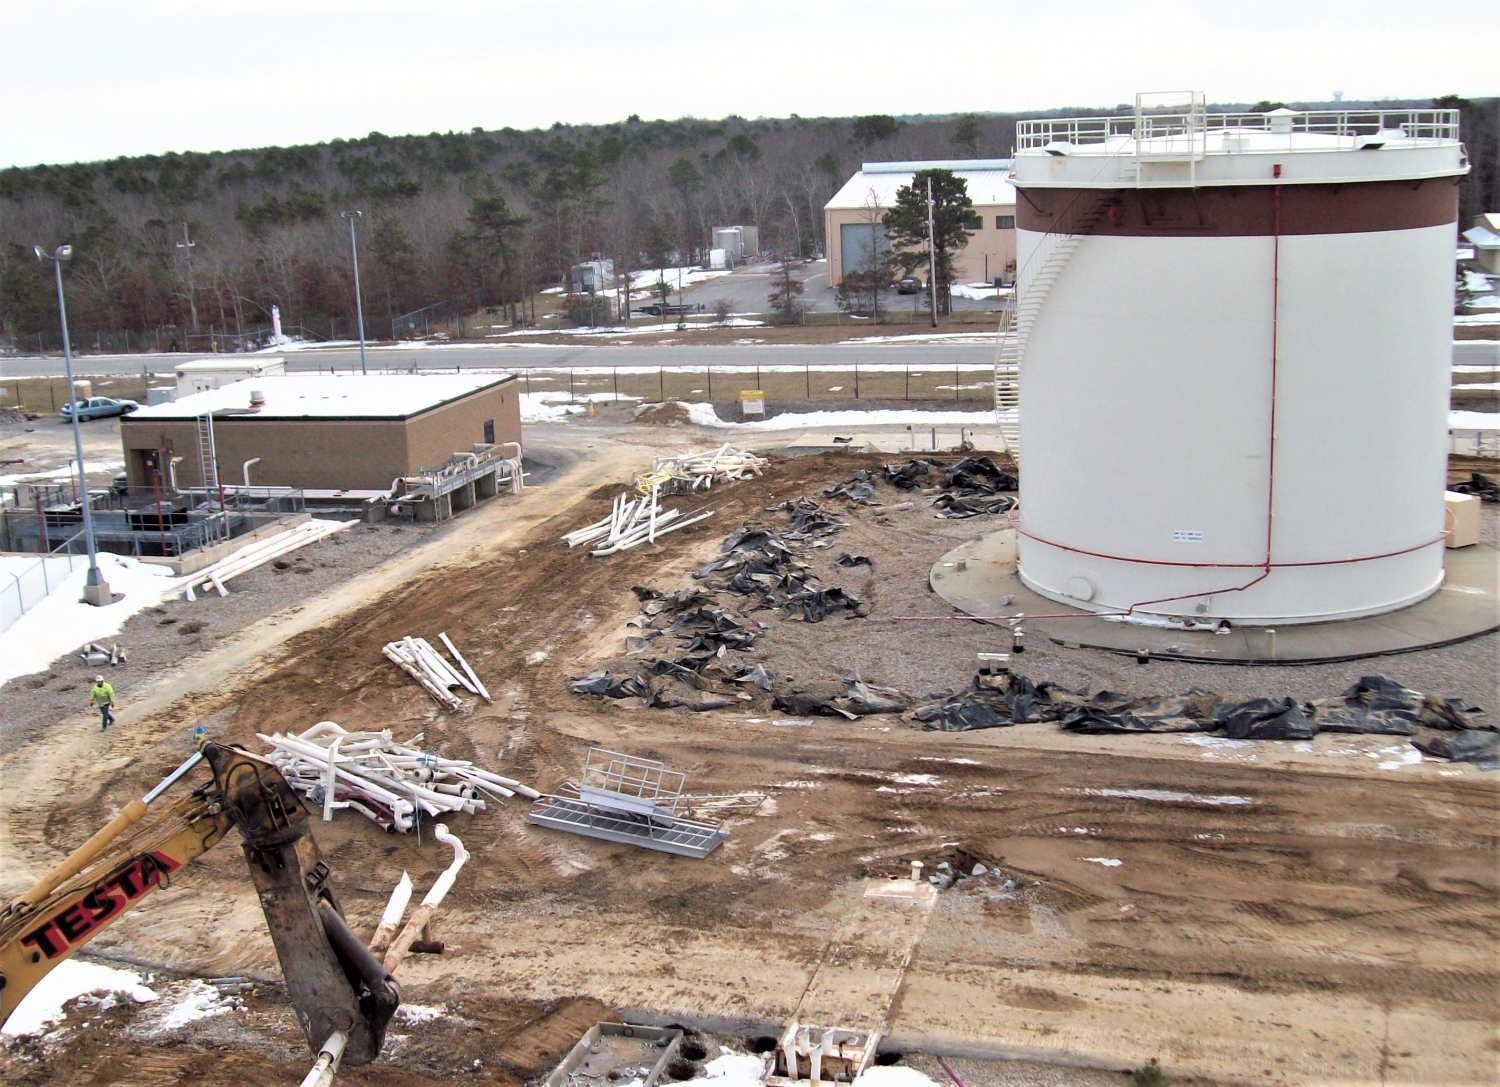 A progress picture of the demolition of a fuel facility